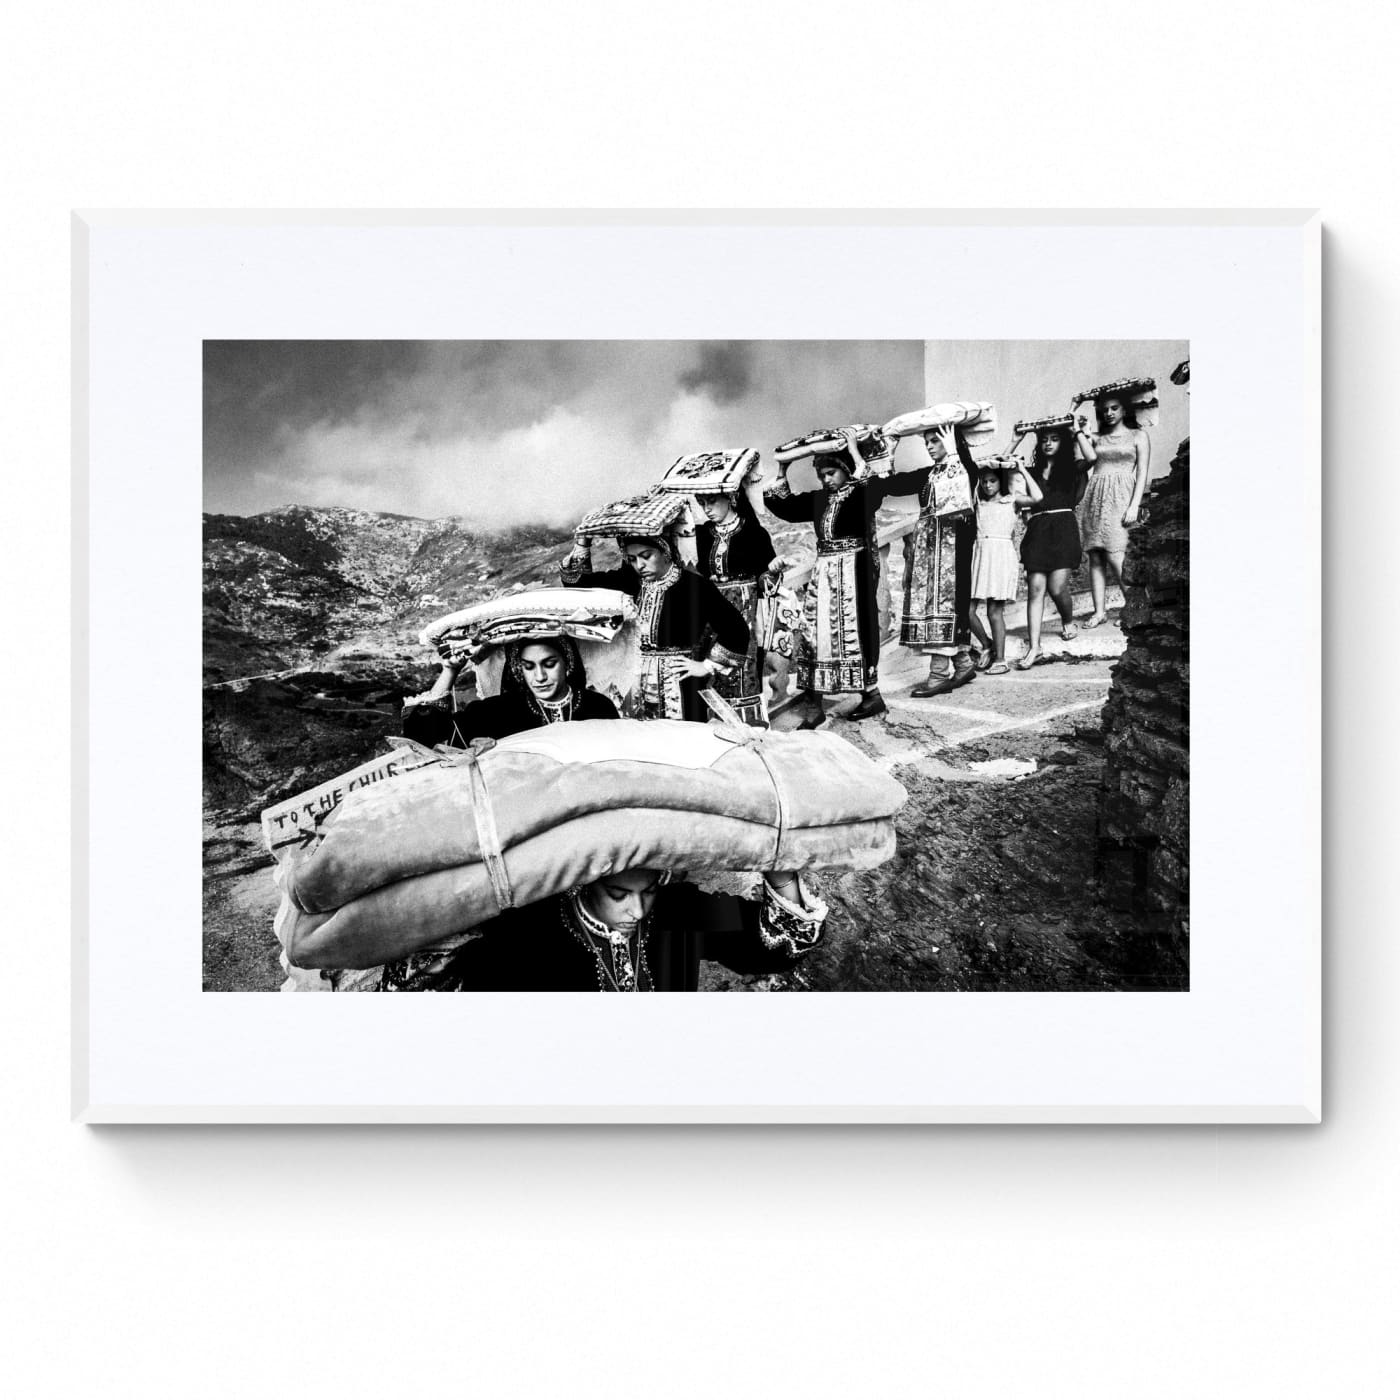 Black and White Photography Wall Art Greece | Limited Edition numbered signed. Dowry transportation Olympos Karpathos Dodecanese.